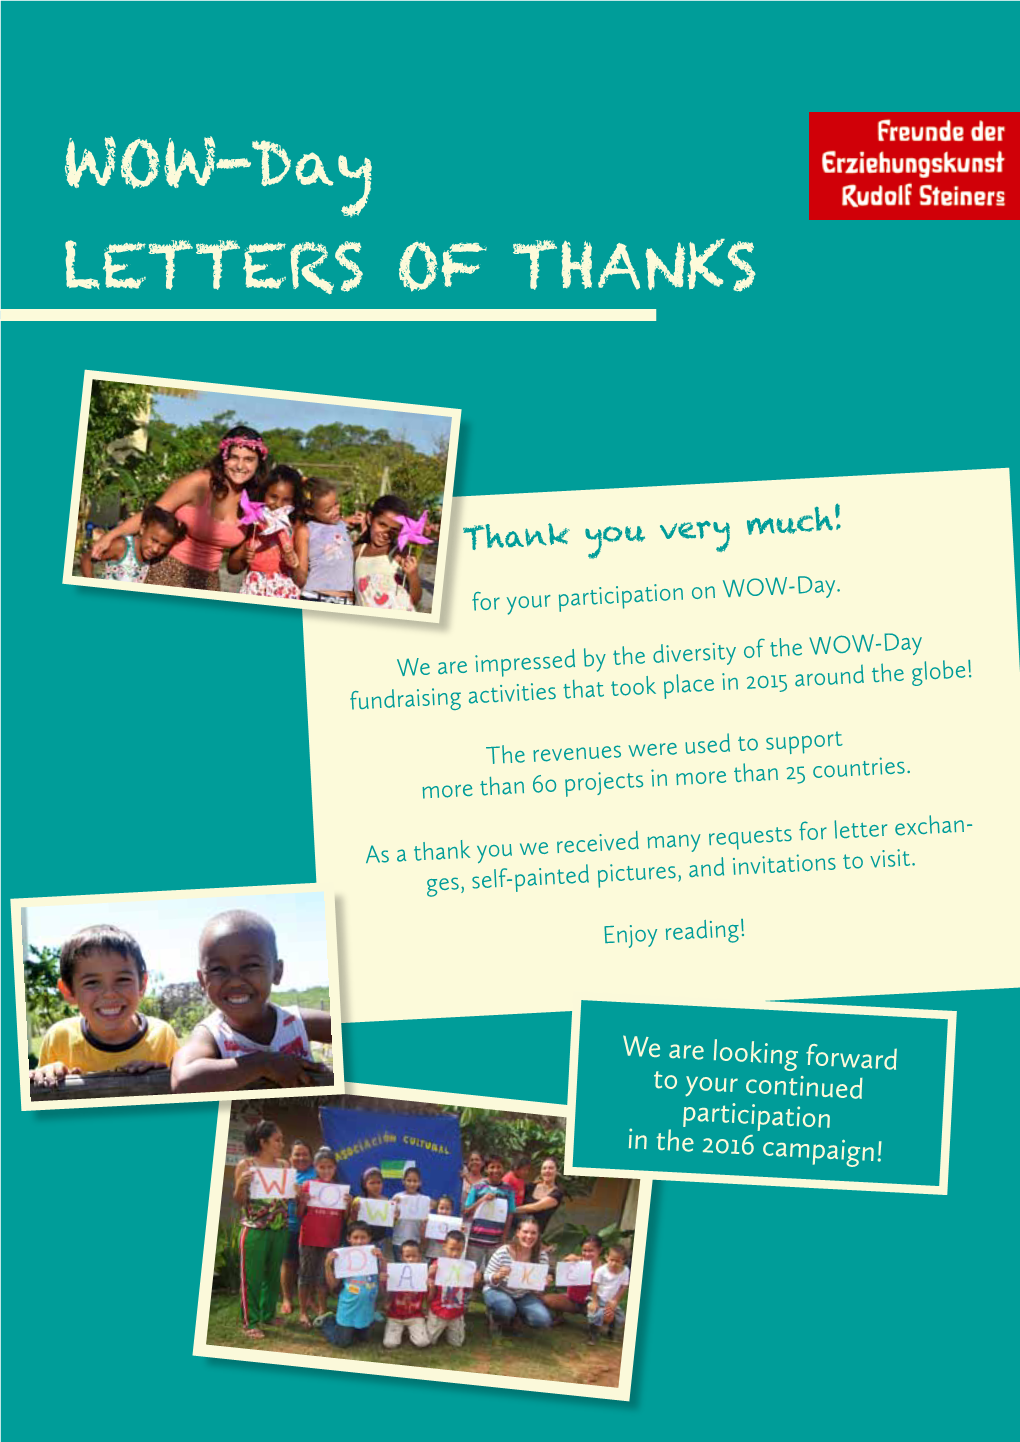 WOW-Day LETTERS of THANKS